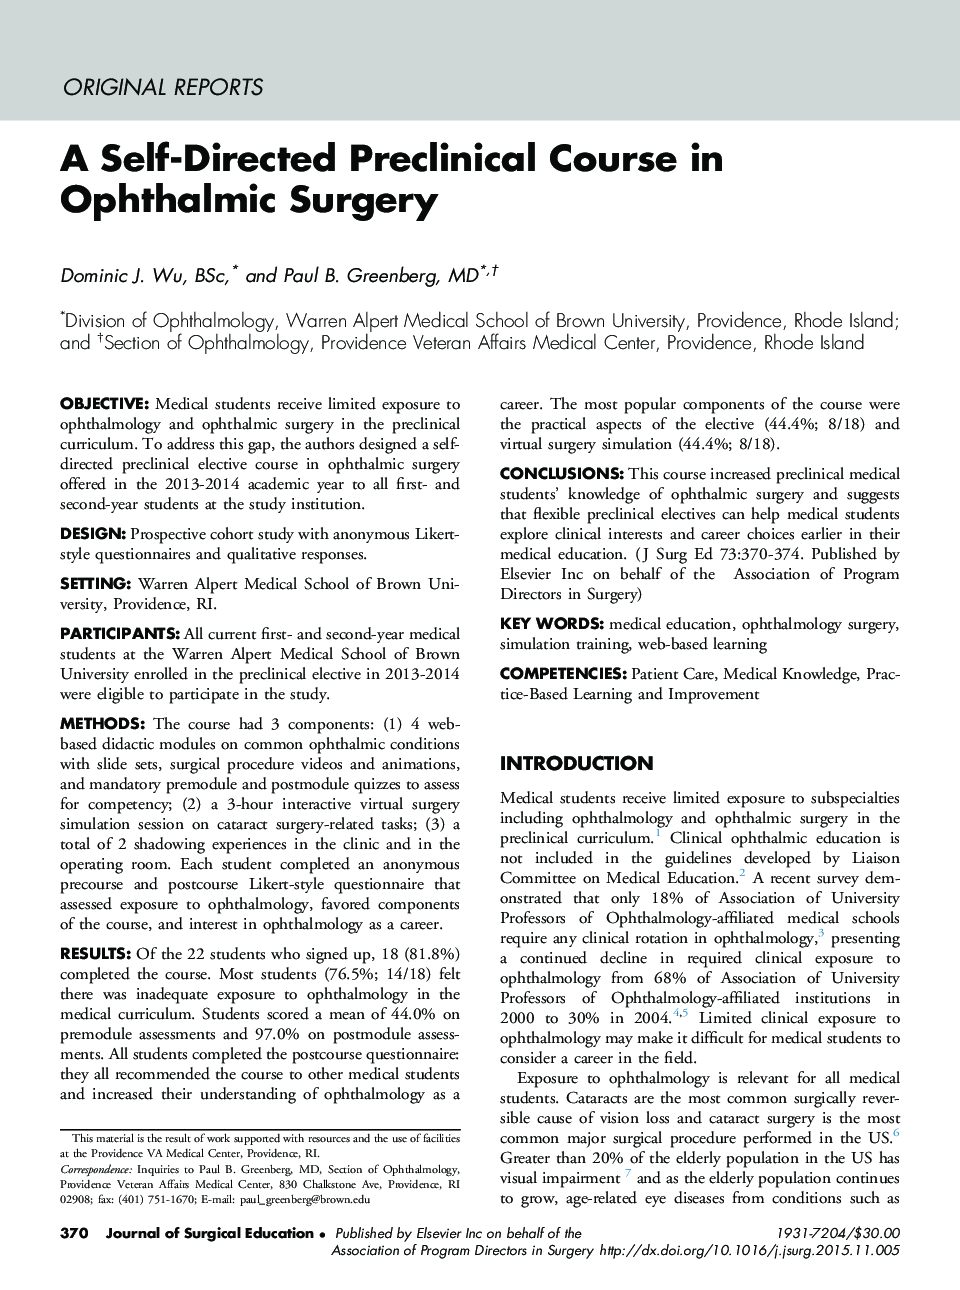 A Self-Directed Preclinical Course in Ophthalmic Surgery